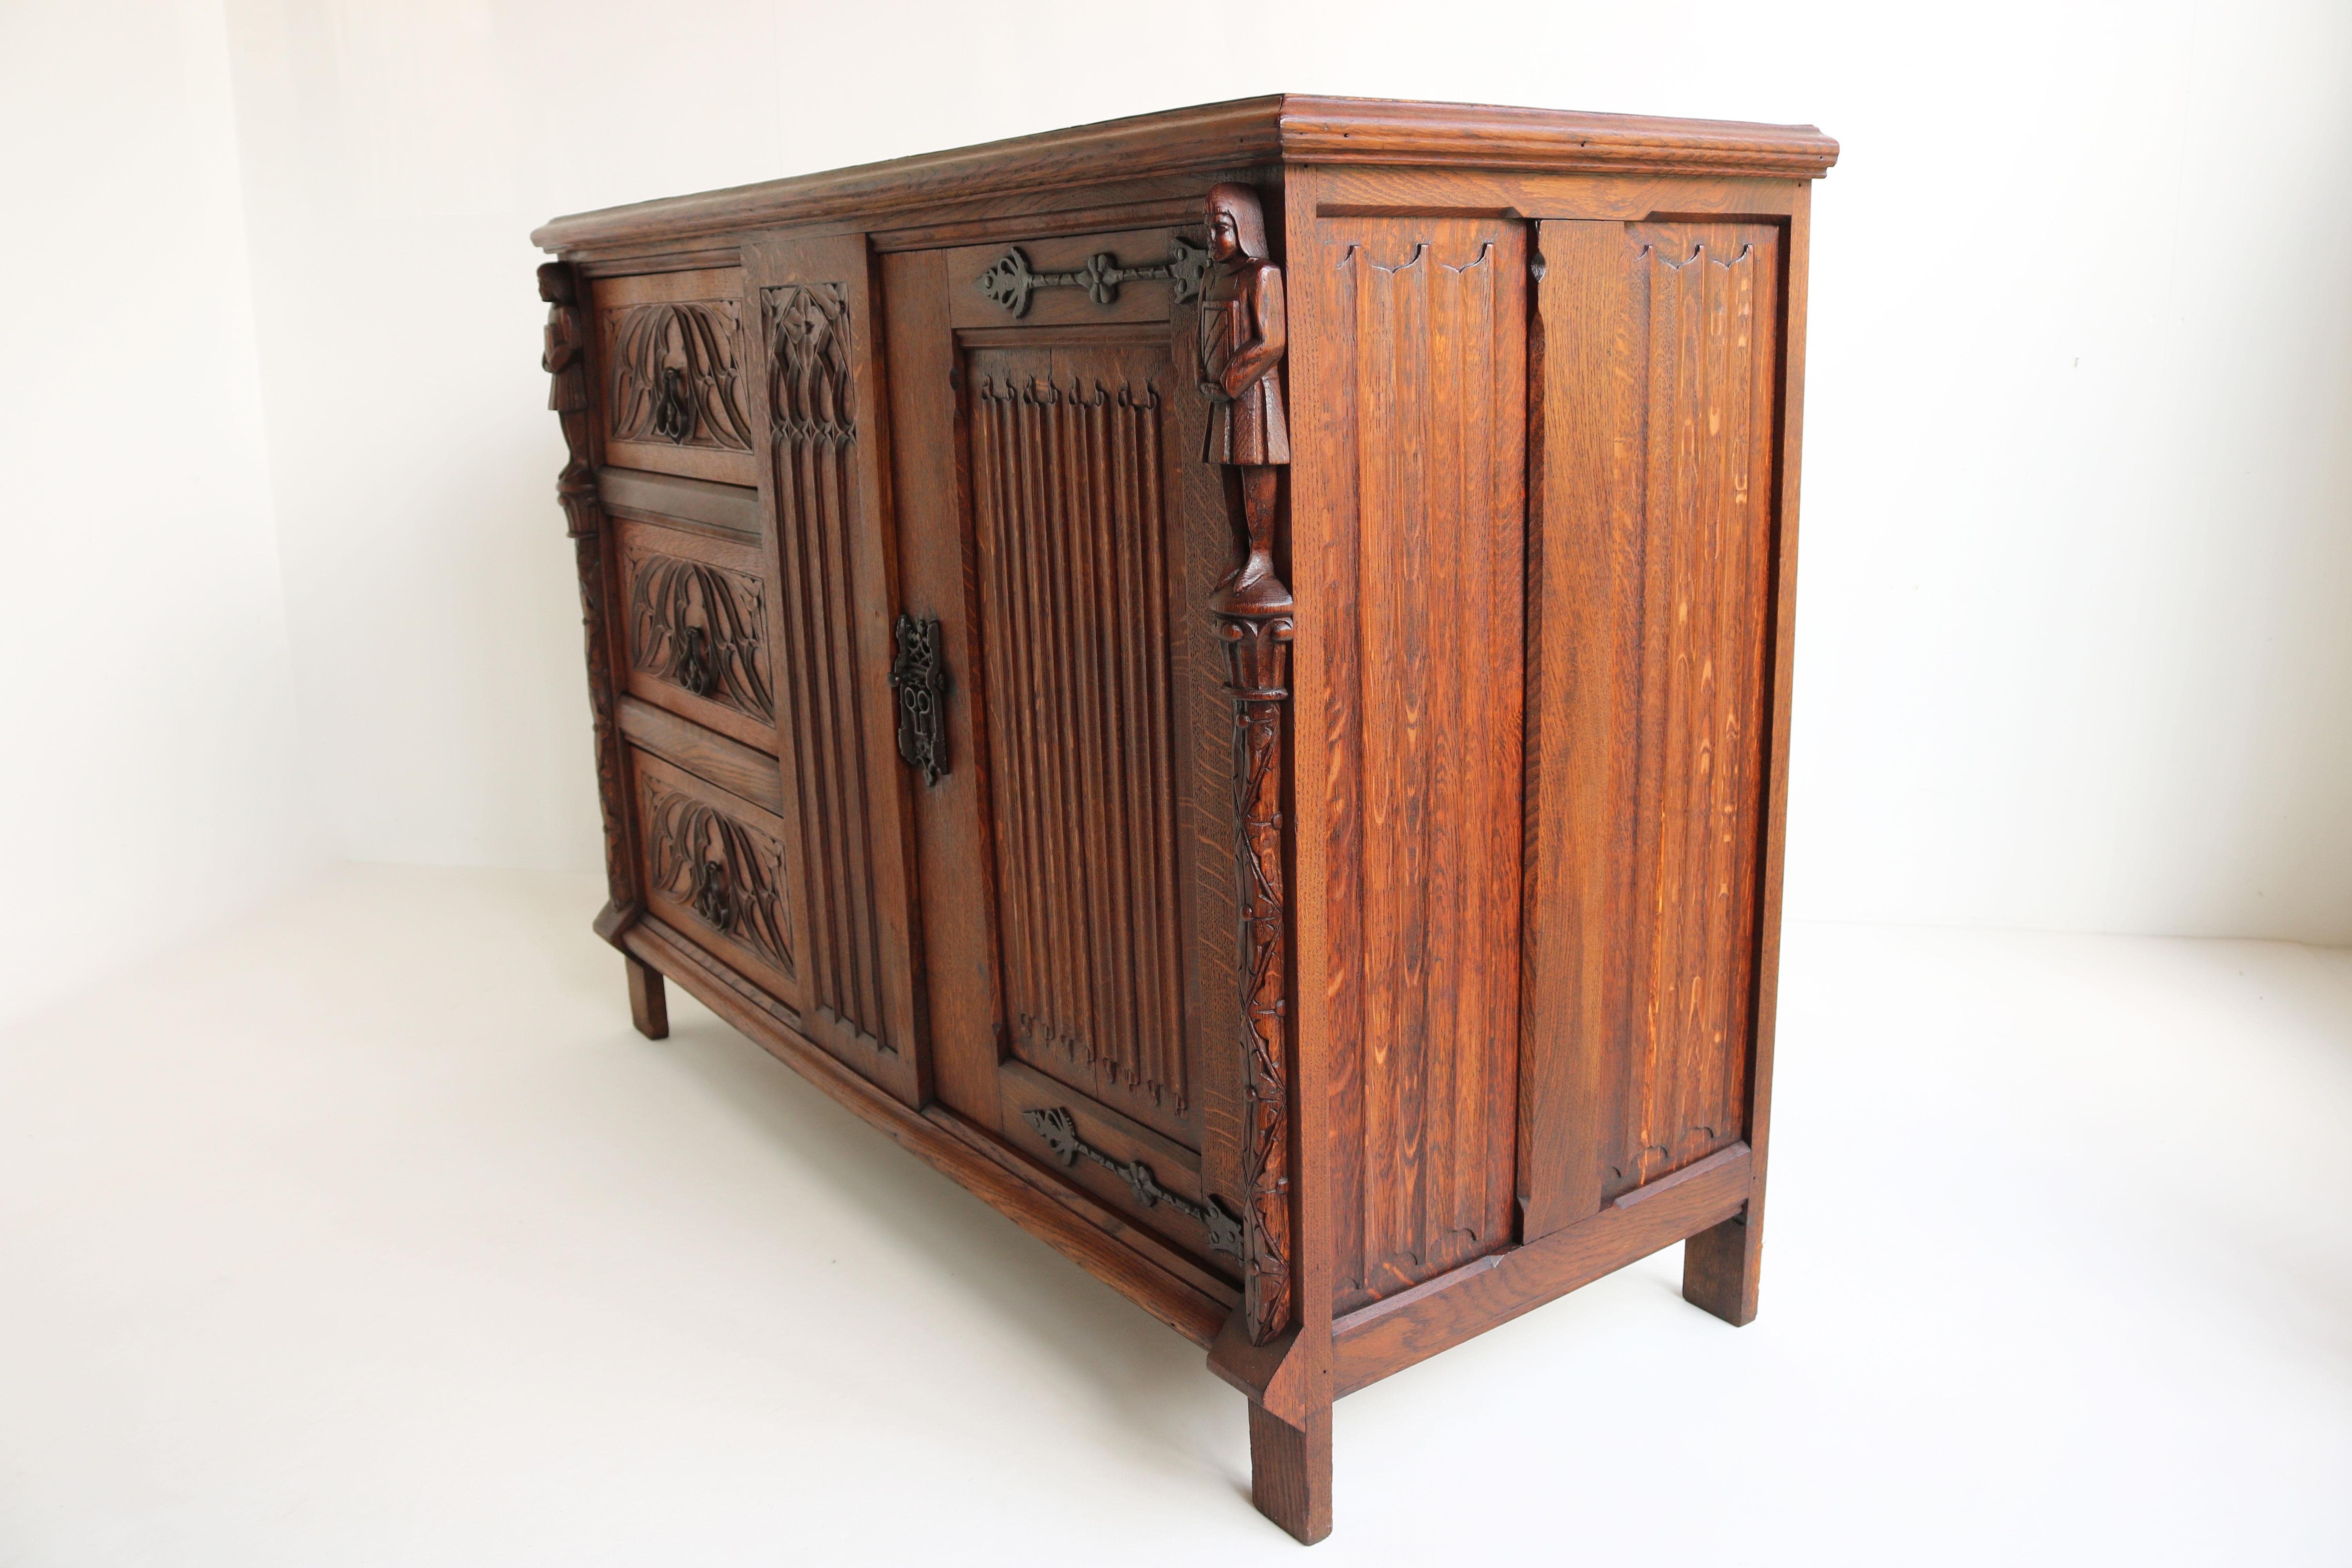 Wrought Iron Antique Gothic Revival Sideboard / Small Cabinet with Drawers Knights Carved Oak